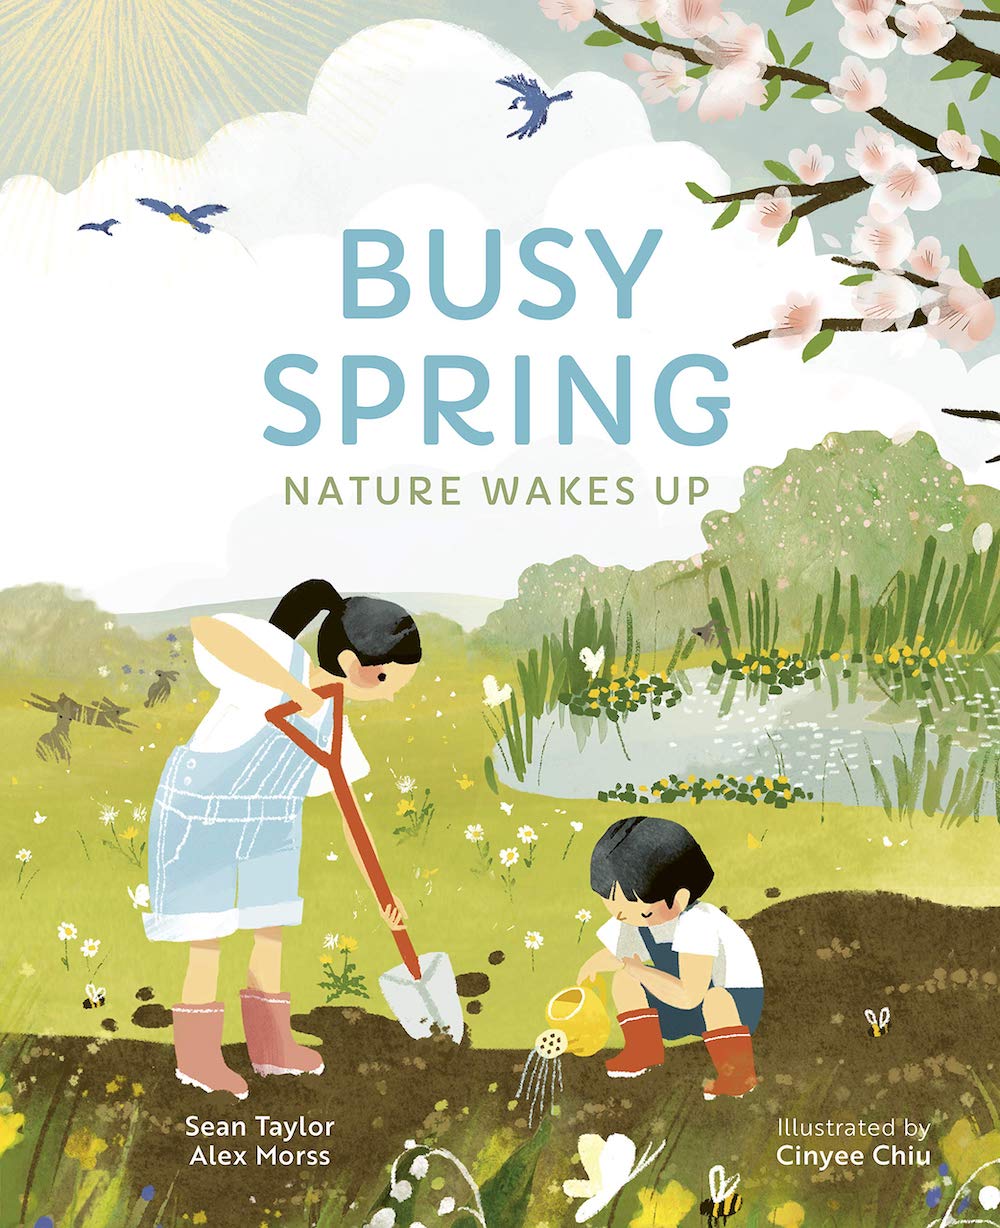 5 new books about spring for kids: Busy Spring: Nature Wakes Up by Sean Taylor and Alex Morss, and illustrated by Cinyee Chiu